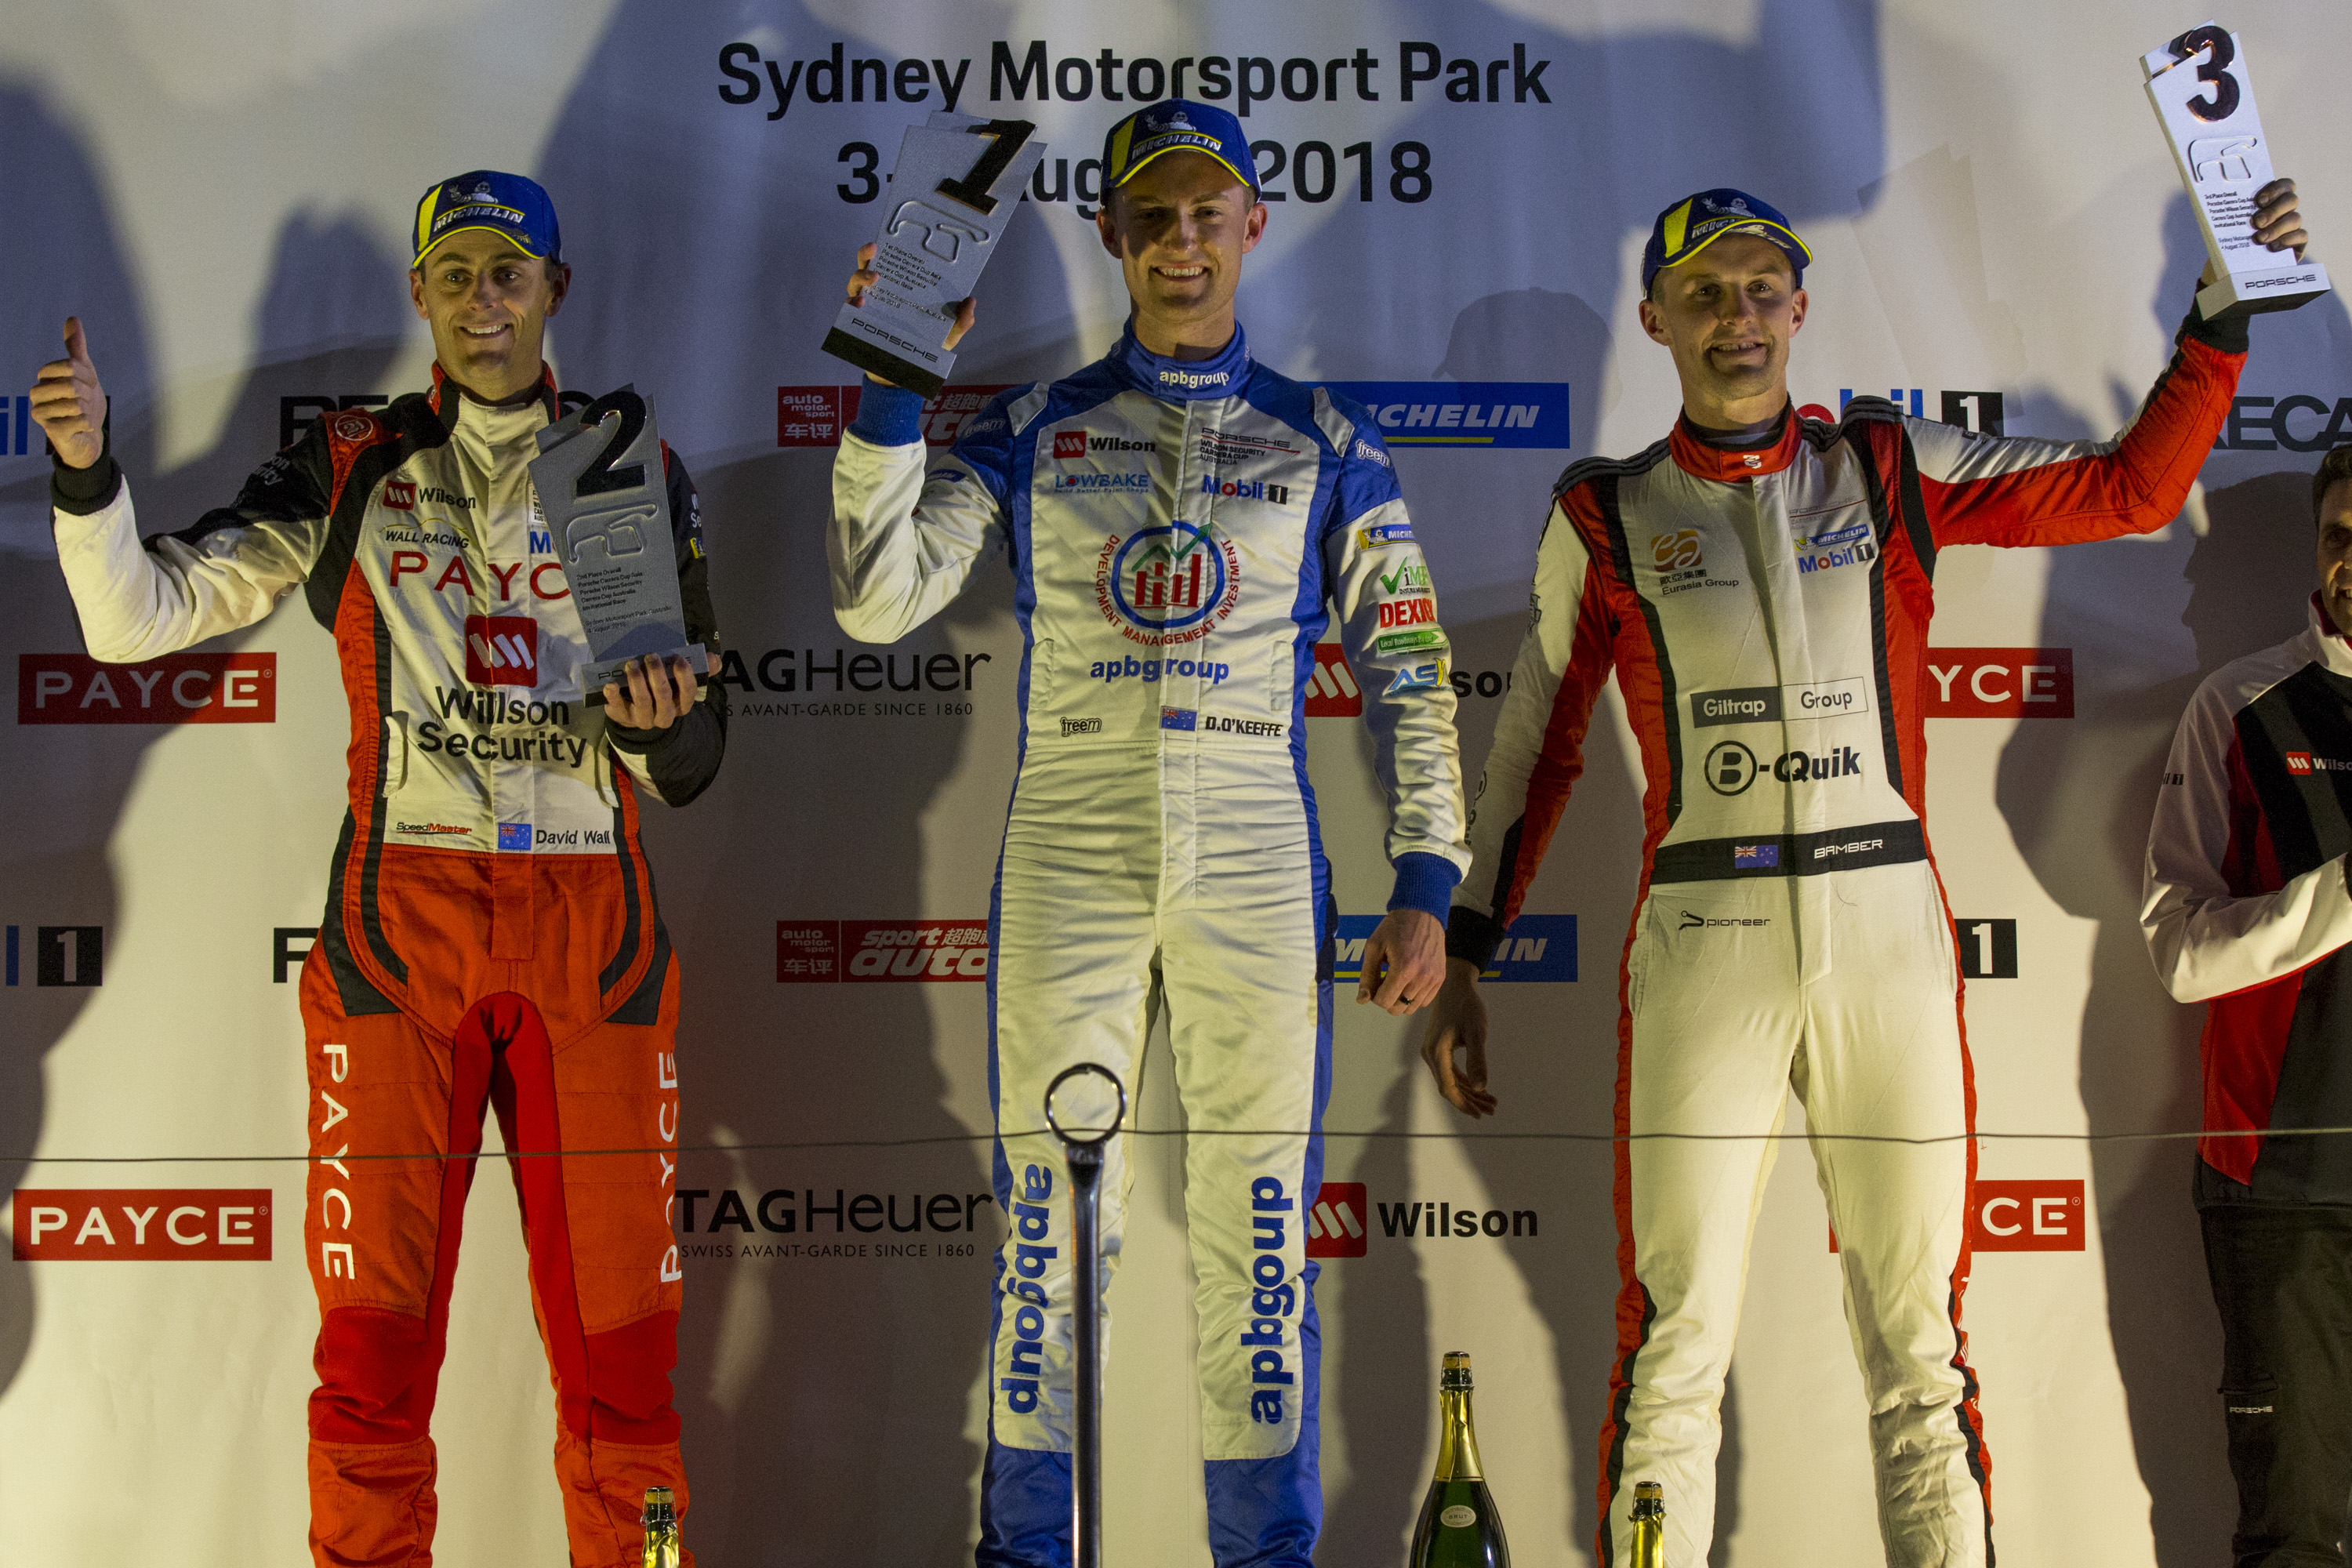 Australia head home Asia in Carrera Cup showdown, Bamber finishes third